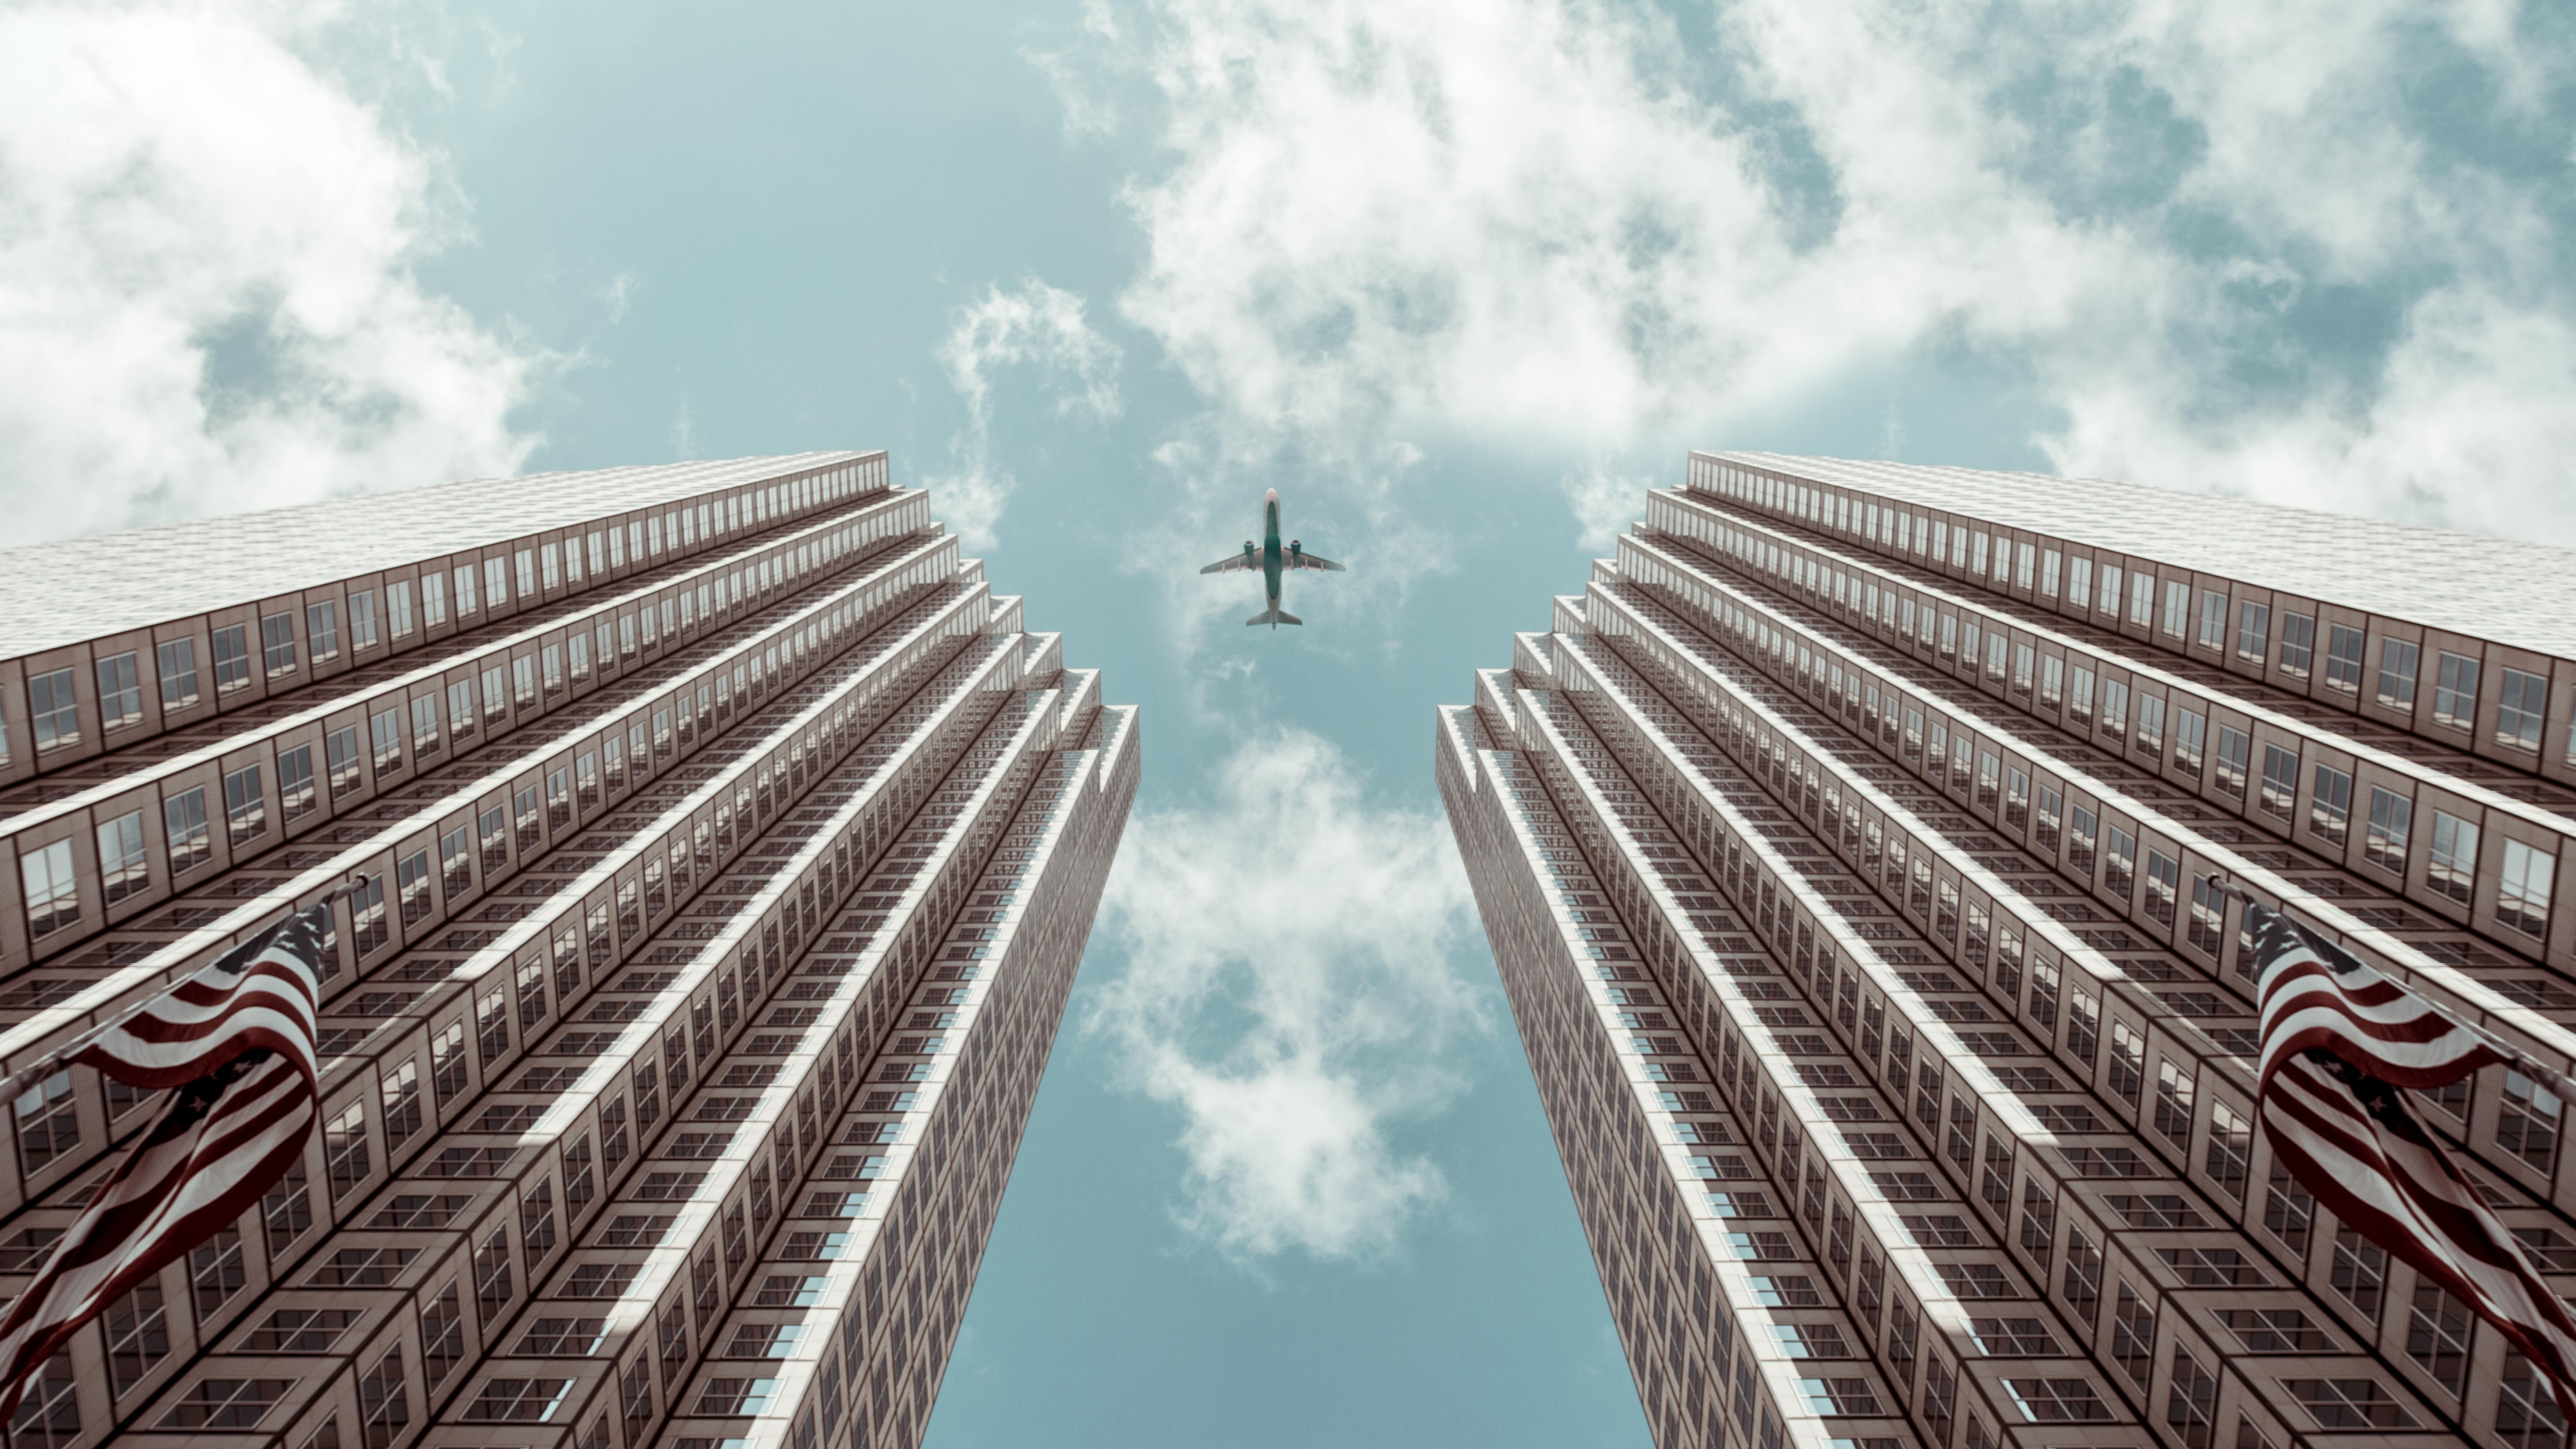 Worm's-eye view Photo of Plane Between Two High-rise Buildings · Free Stock  Photo